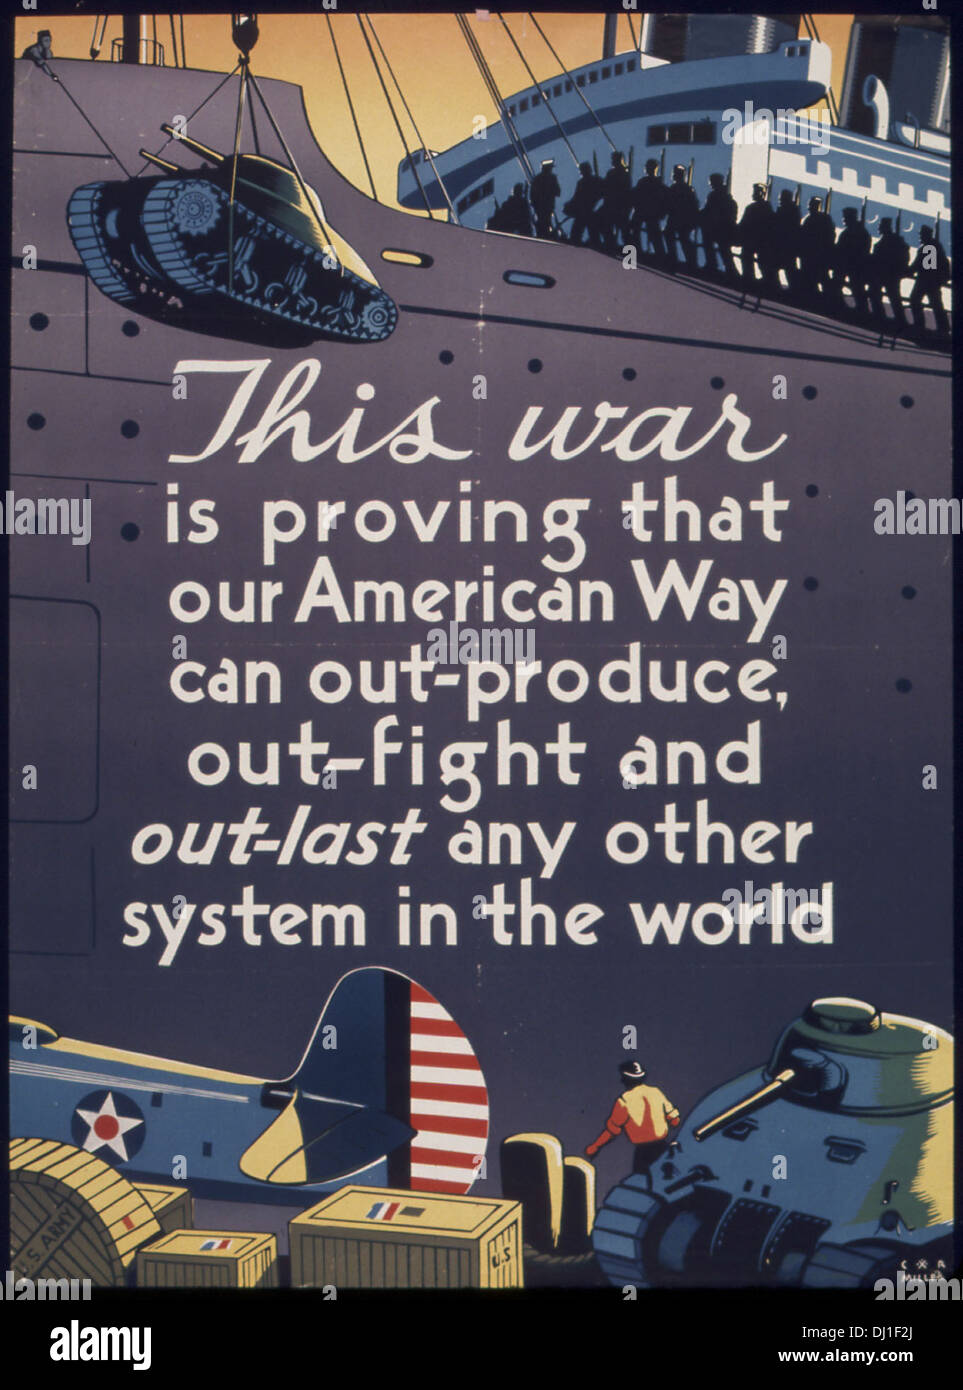 THIS WAR IS PROVING THAT OUR AMERICAN WAY CAN OUT-PRODUCE, OUT-FIGHT AND OUT-LAST ANY OTHER SYSTEM IN THE WORLD. 808 Stock Photo